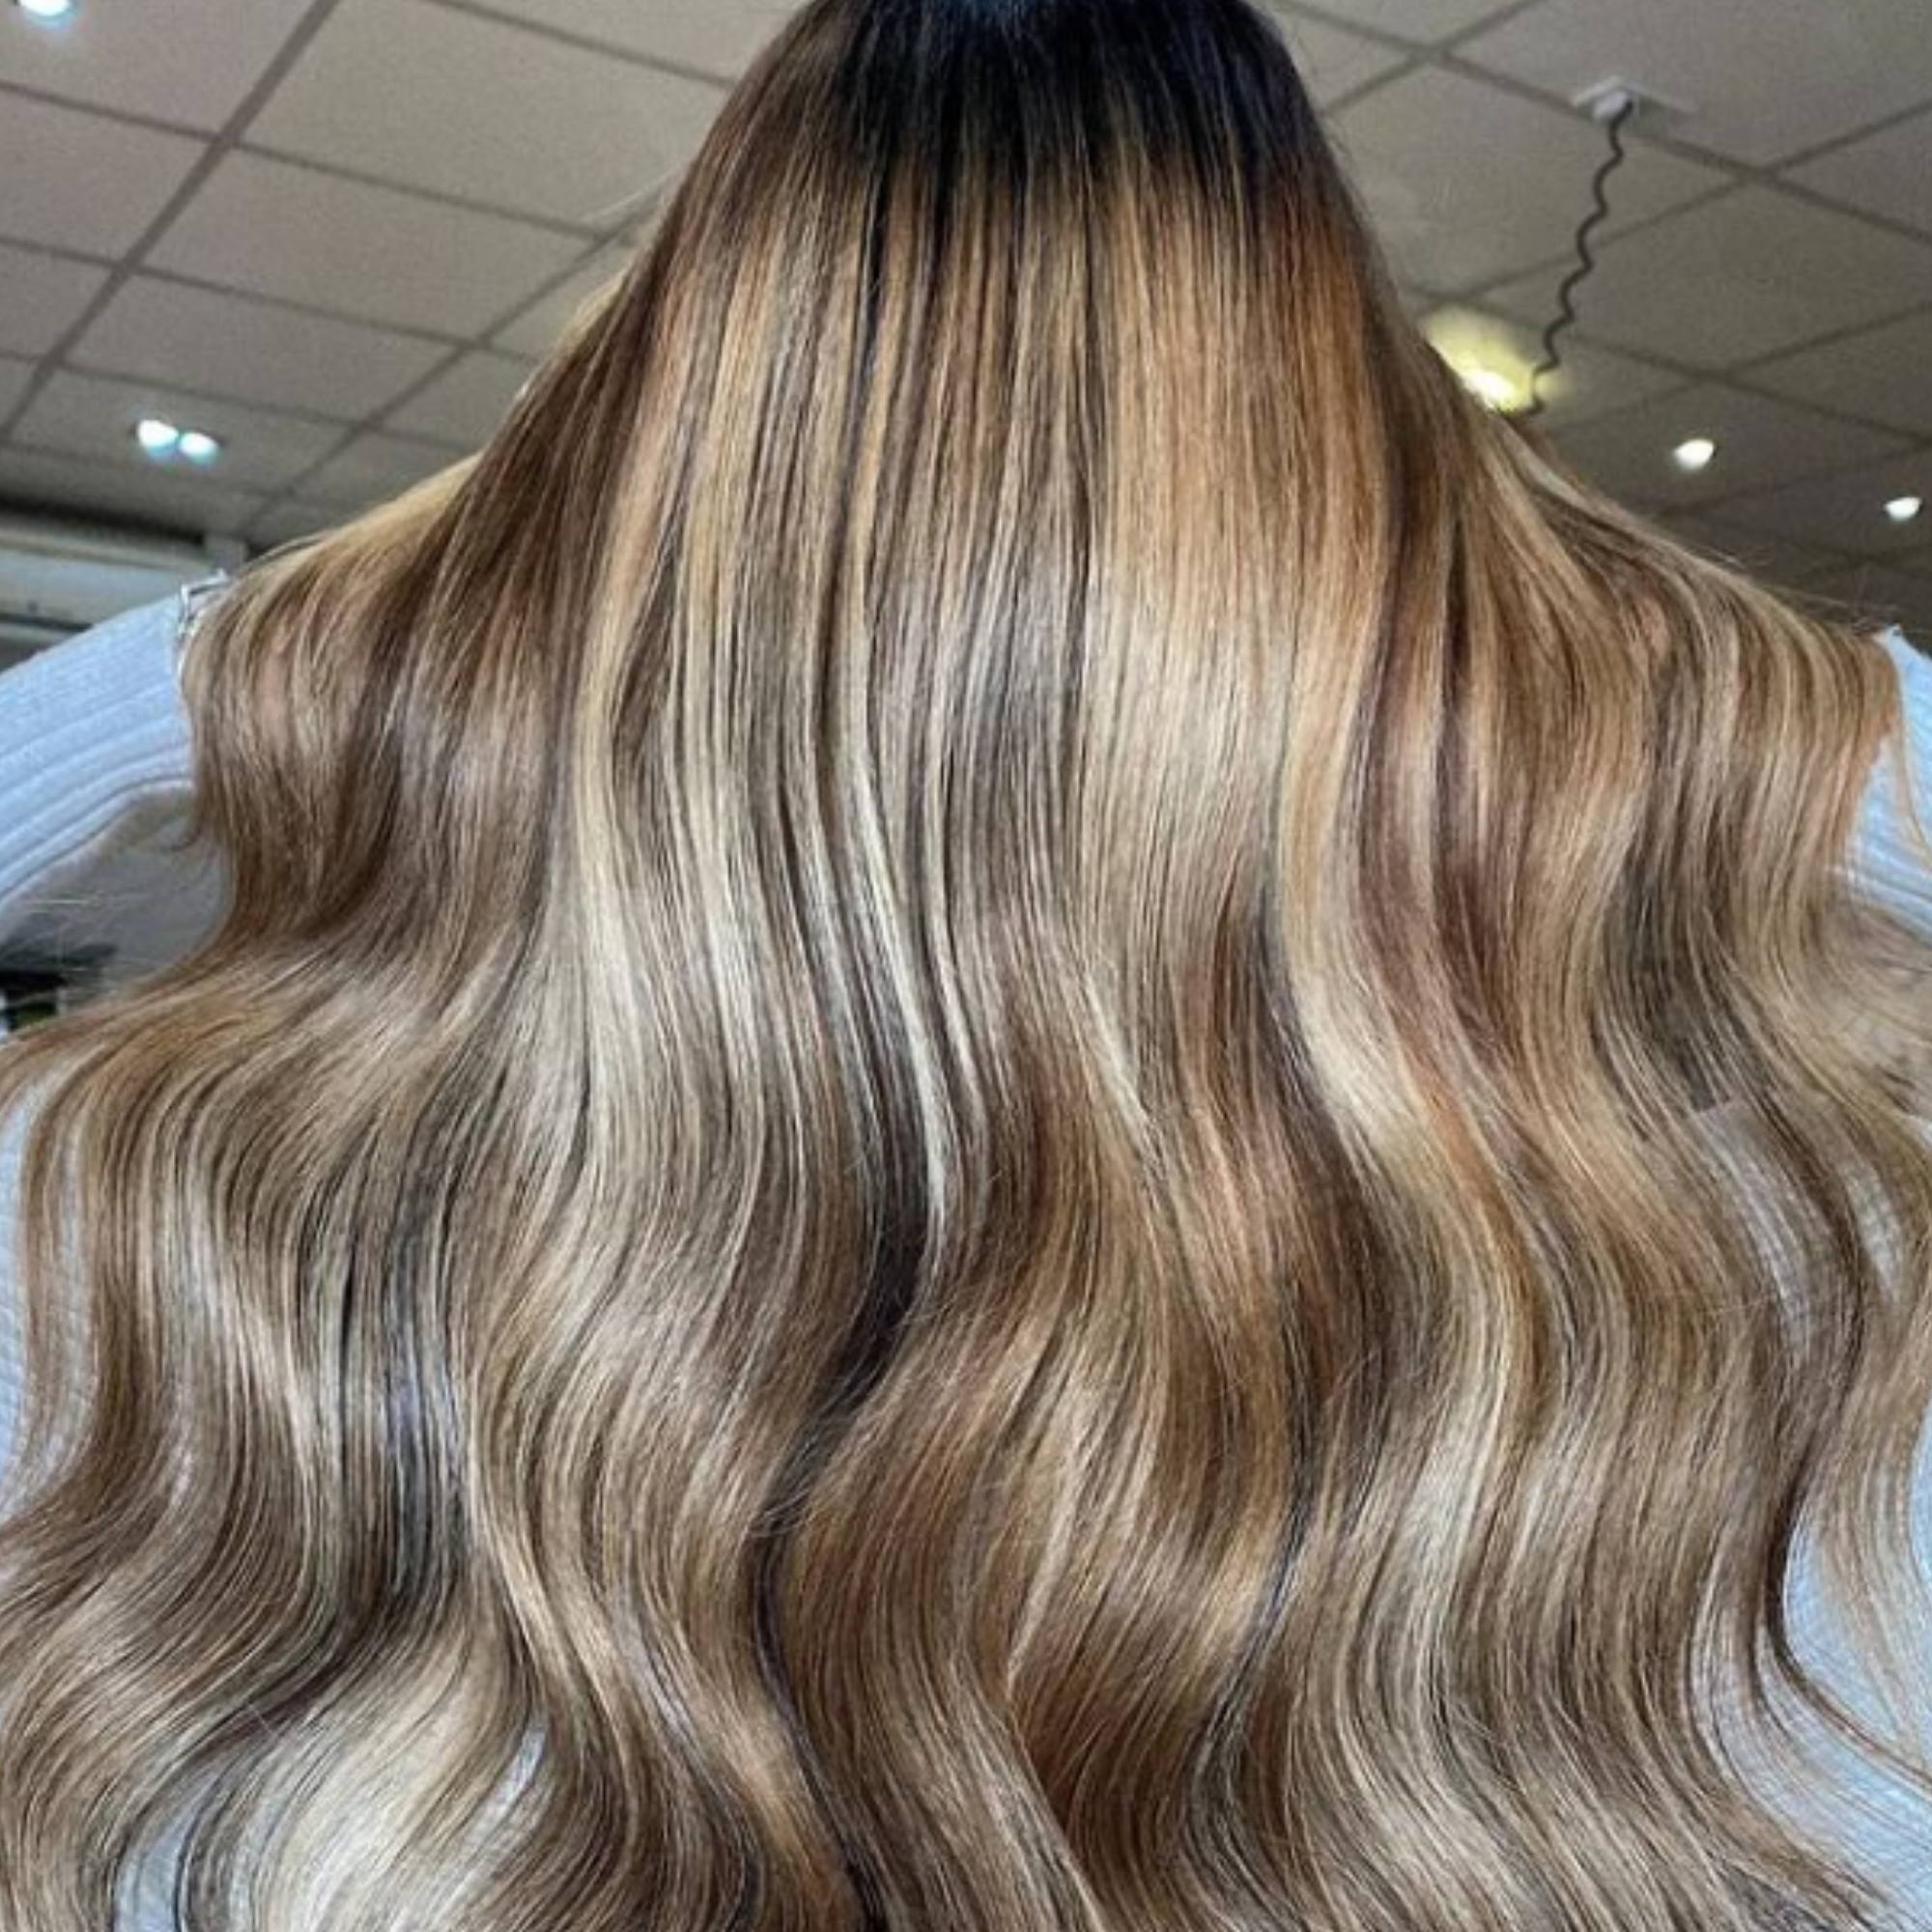 "customer wearing hair rehab london 20 inch luxe clip-in hair extensions in blonde balayage shade"